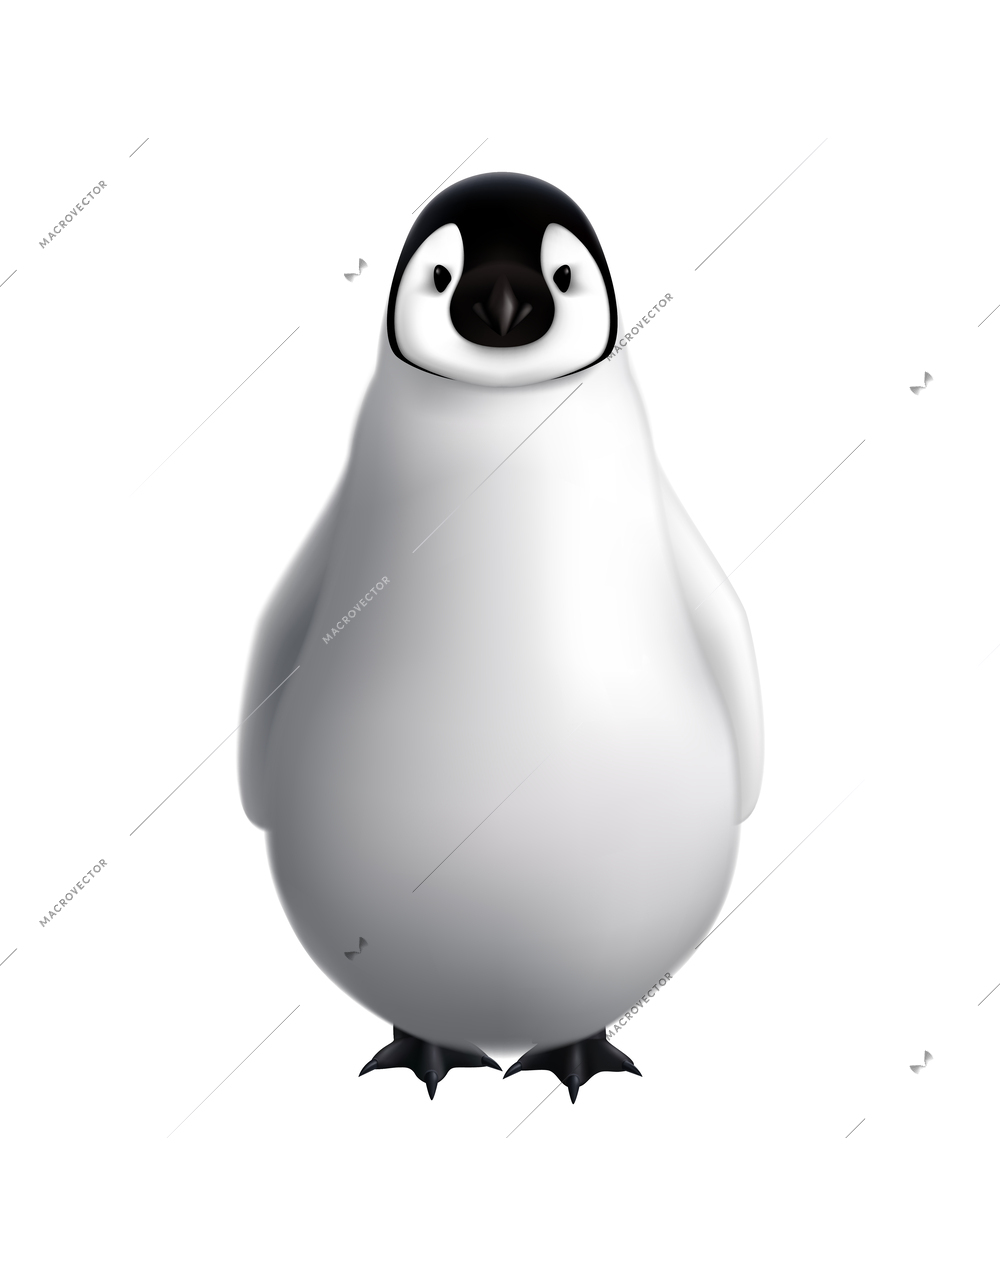 Penguin realistic composition with isolated image of arctic bird on blank background vector illustration